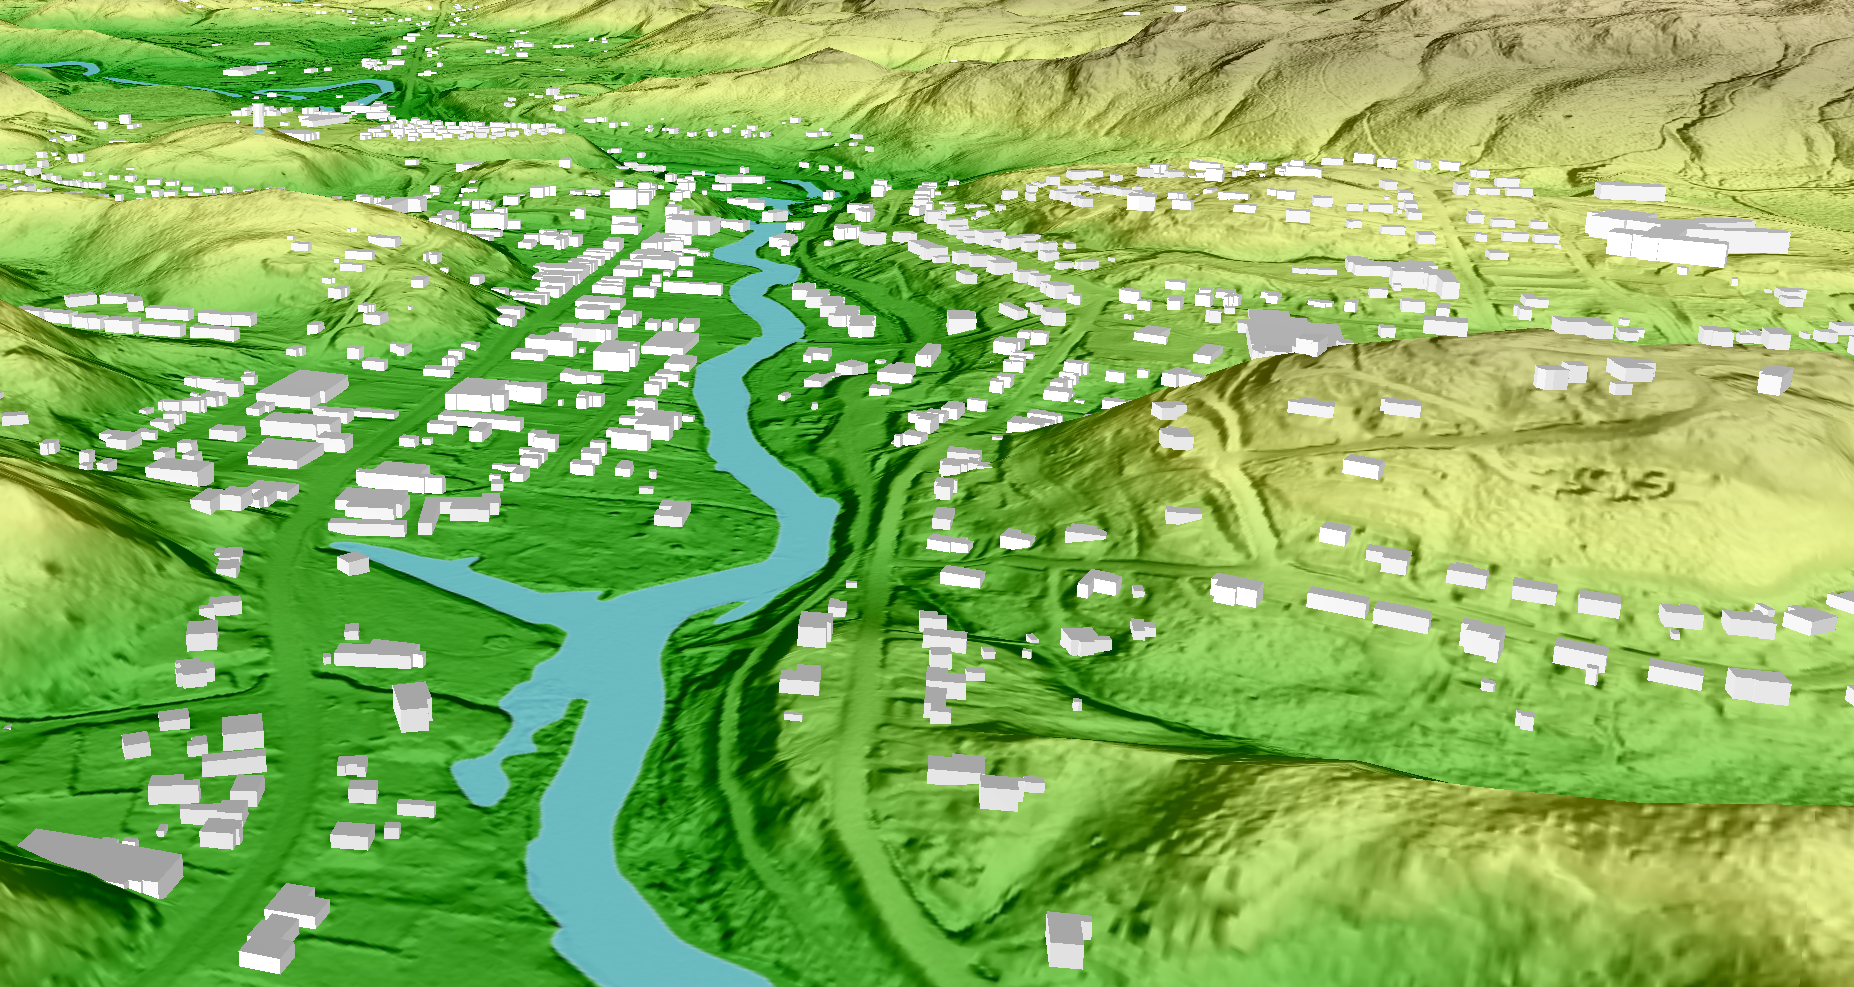 Colored shaded relief of a digital terrain model derived from LiDAR. 3D buildings derived from LiDAR and hydrography features from the National Hydro Network are superimposed. The image covers the city of Bancroft, ON. 